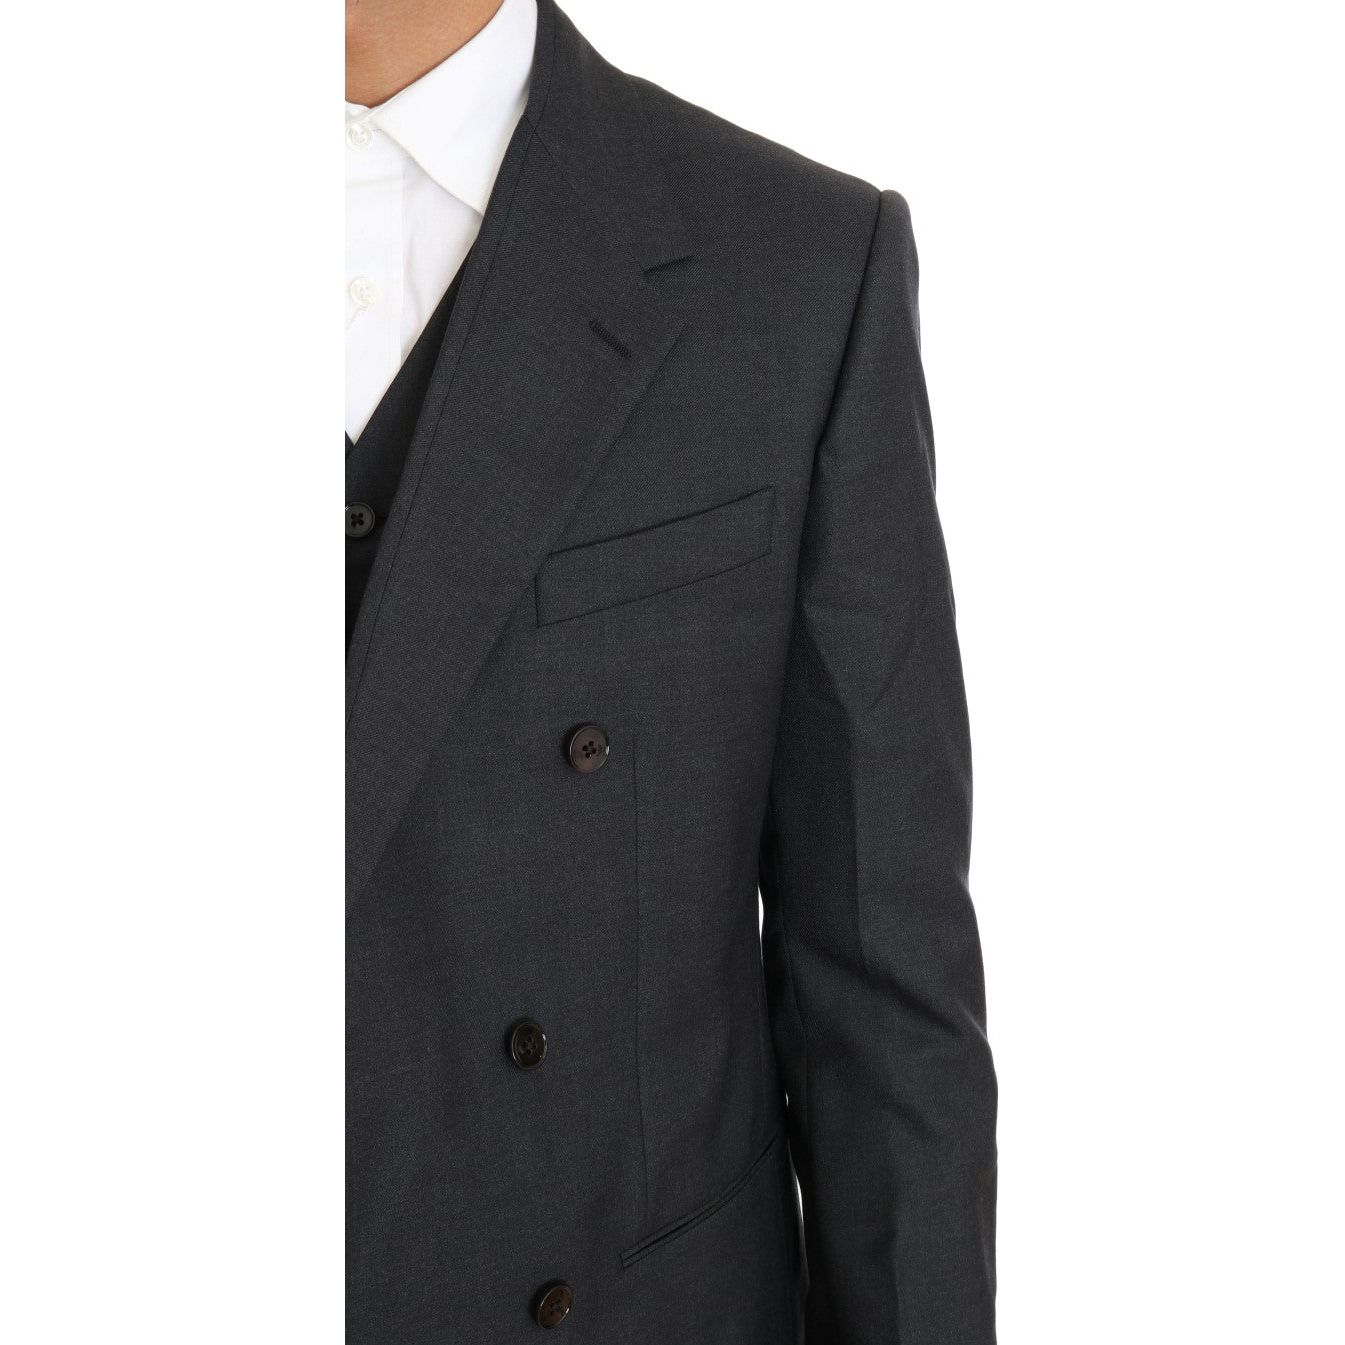 Dolce & Gabbana Elegant Gray Double Breasted Wool Silk Suit gray-wool-silk-double-breasted-slim-suit